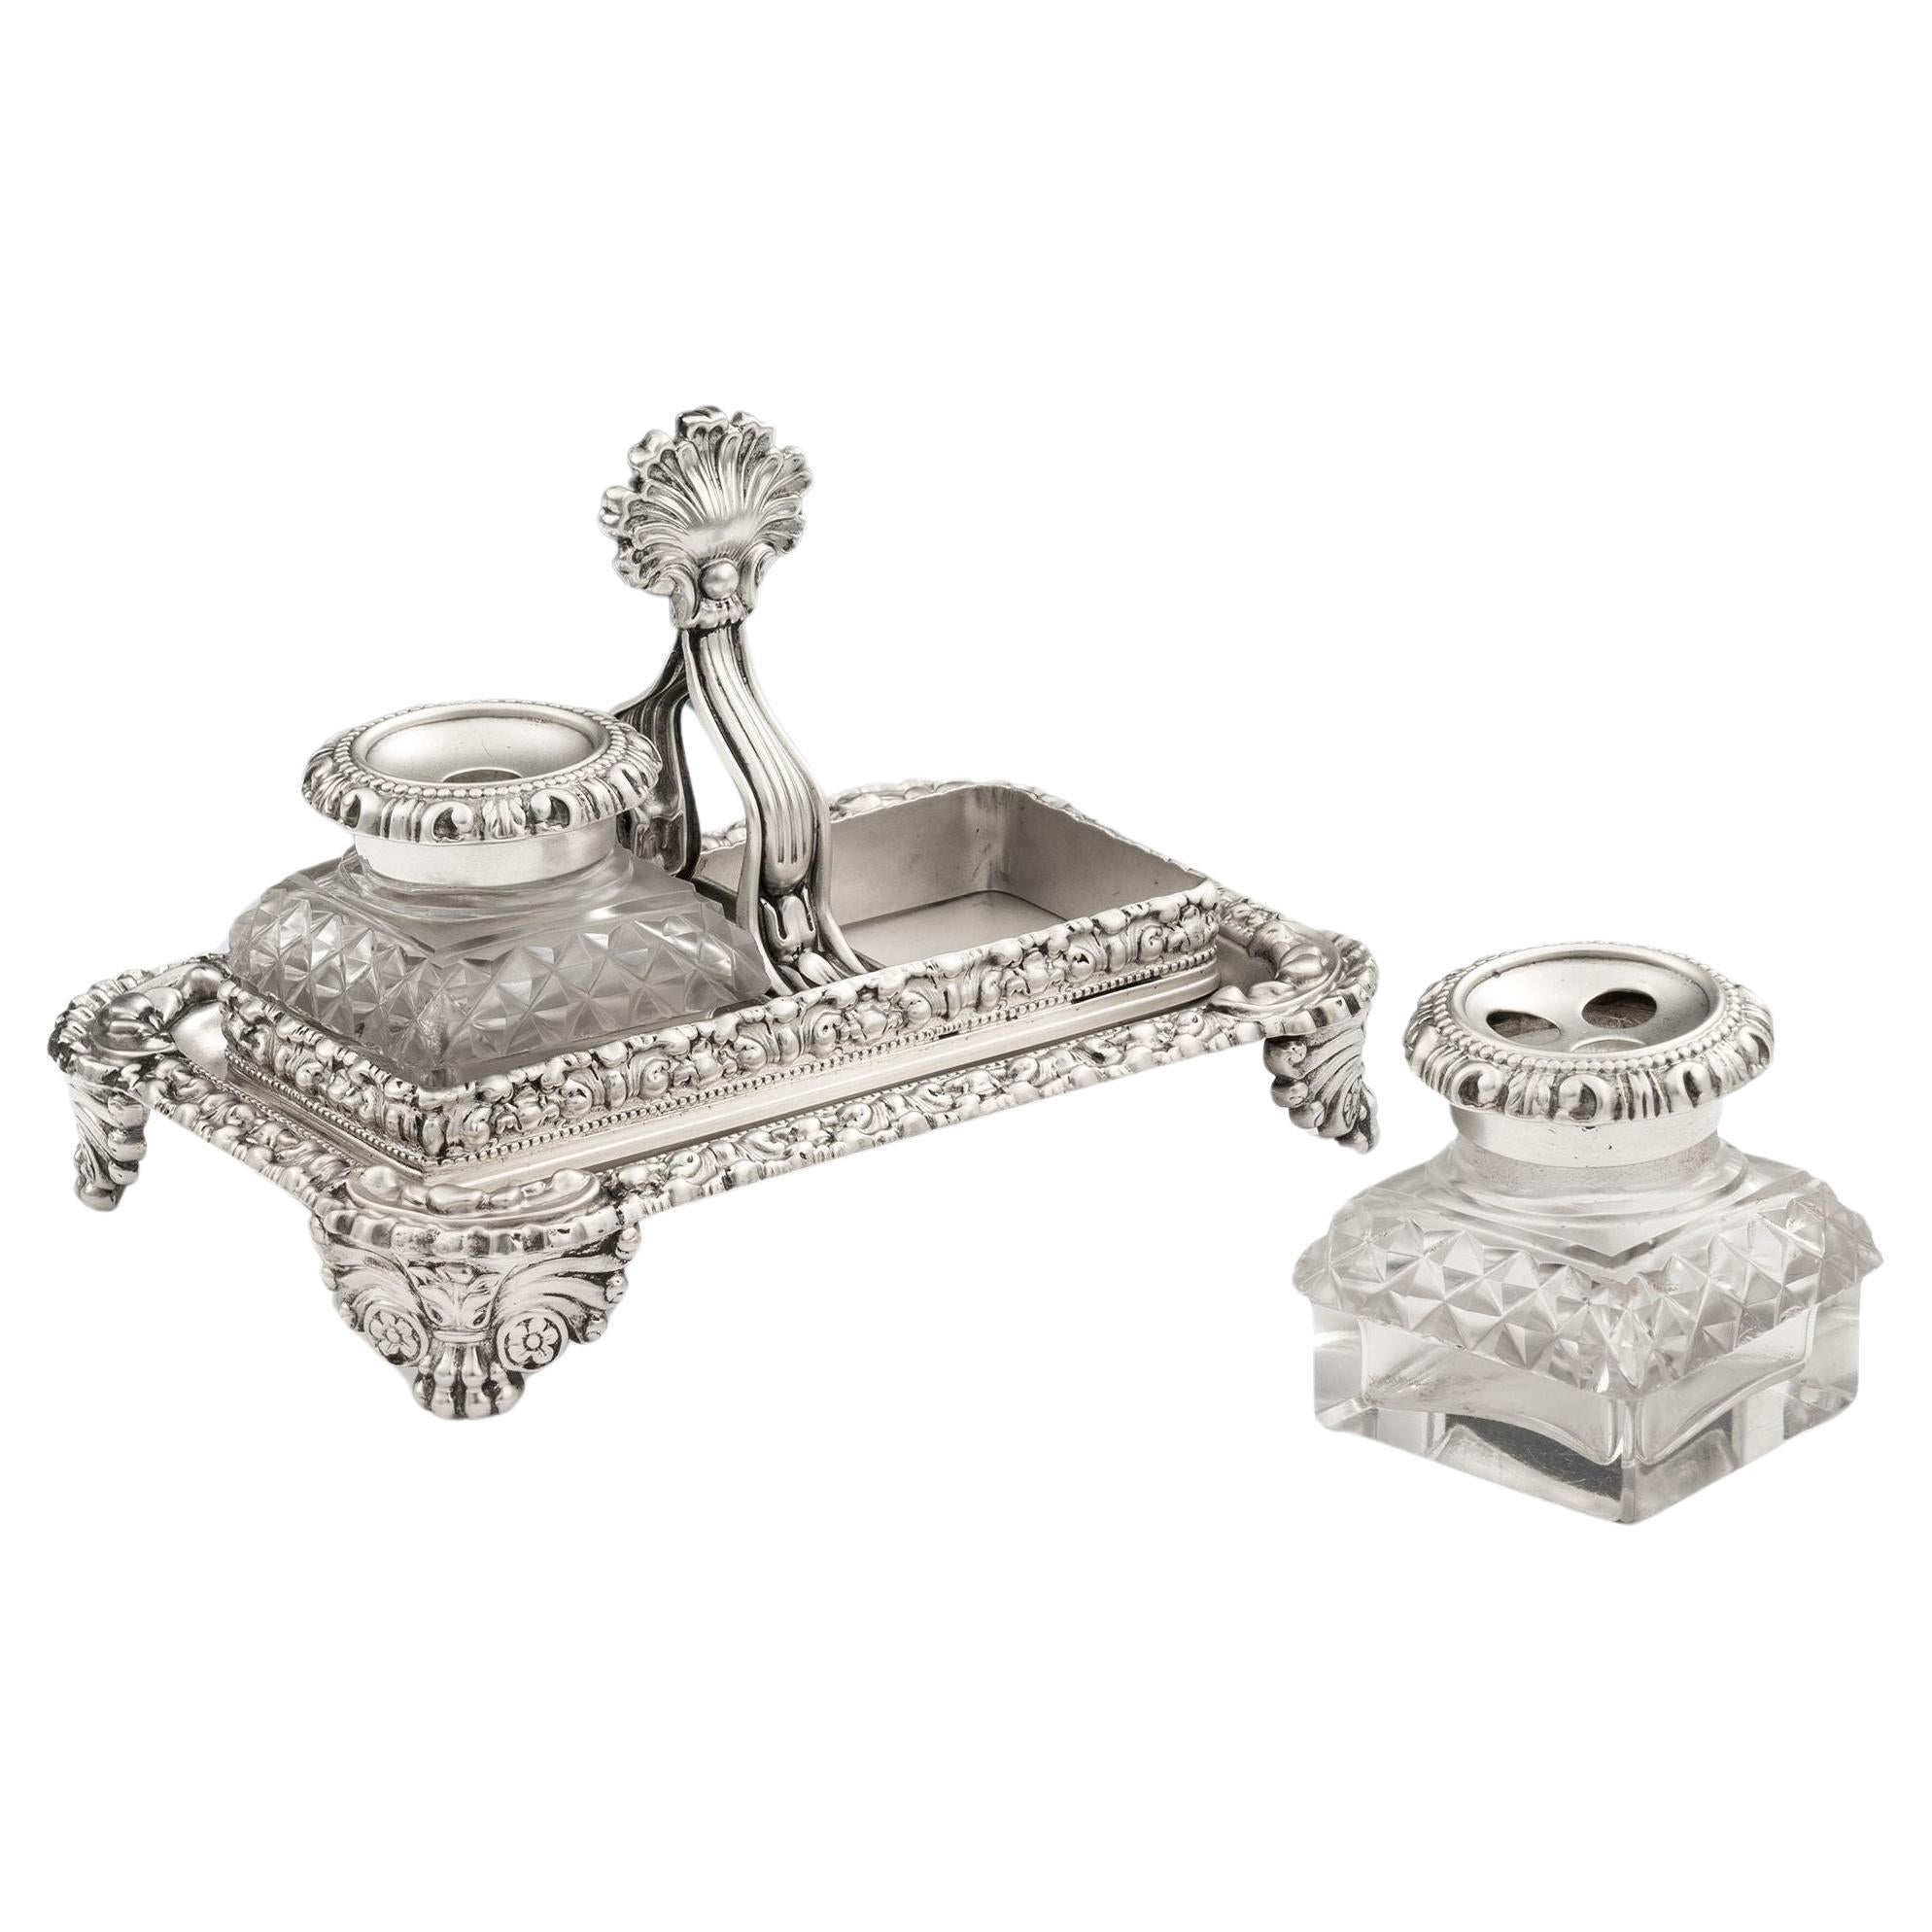 George IV Bachelor Inkstand Made in Sheffield by Thomas & James Settle, 1822